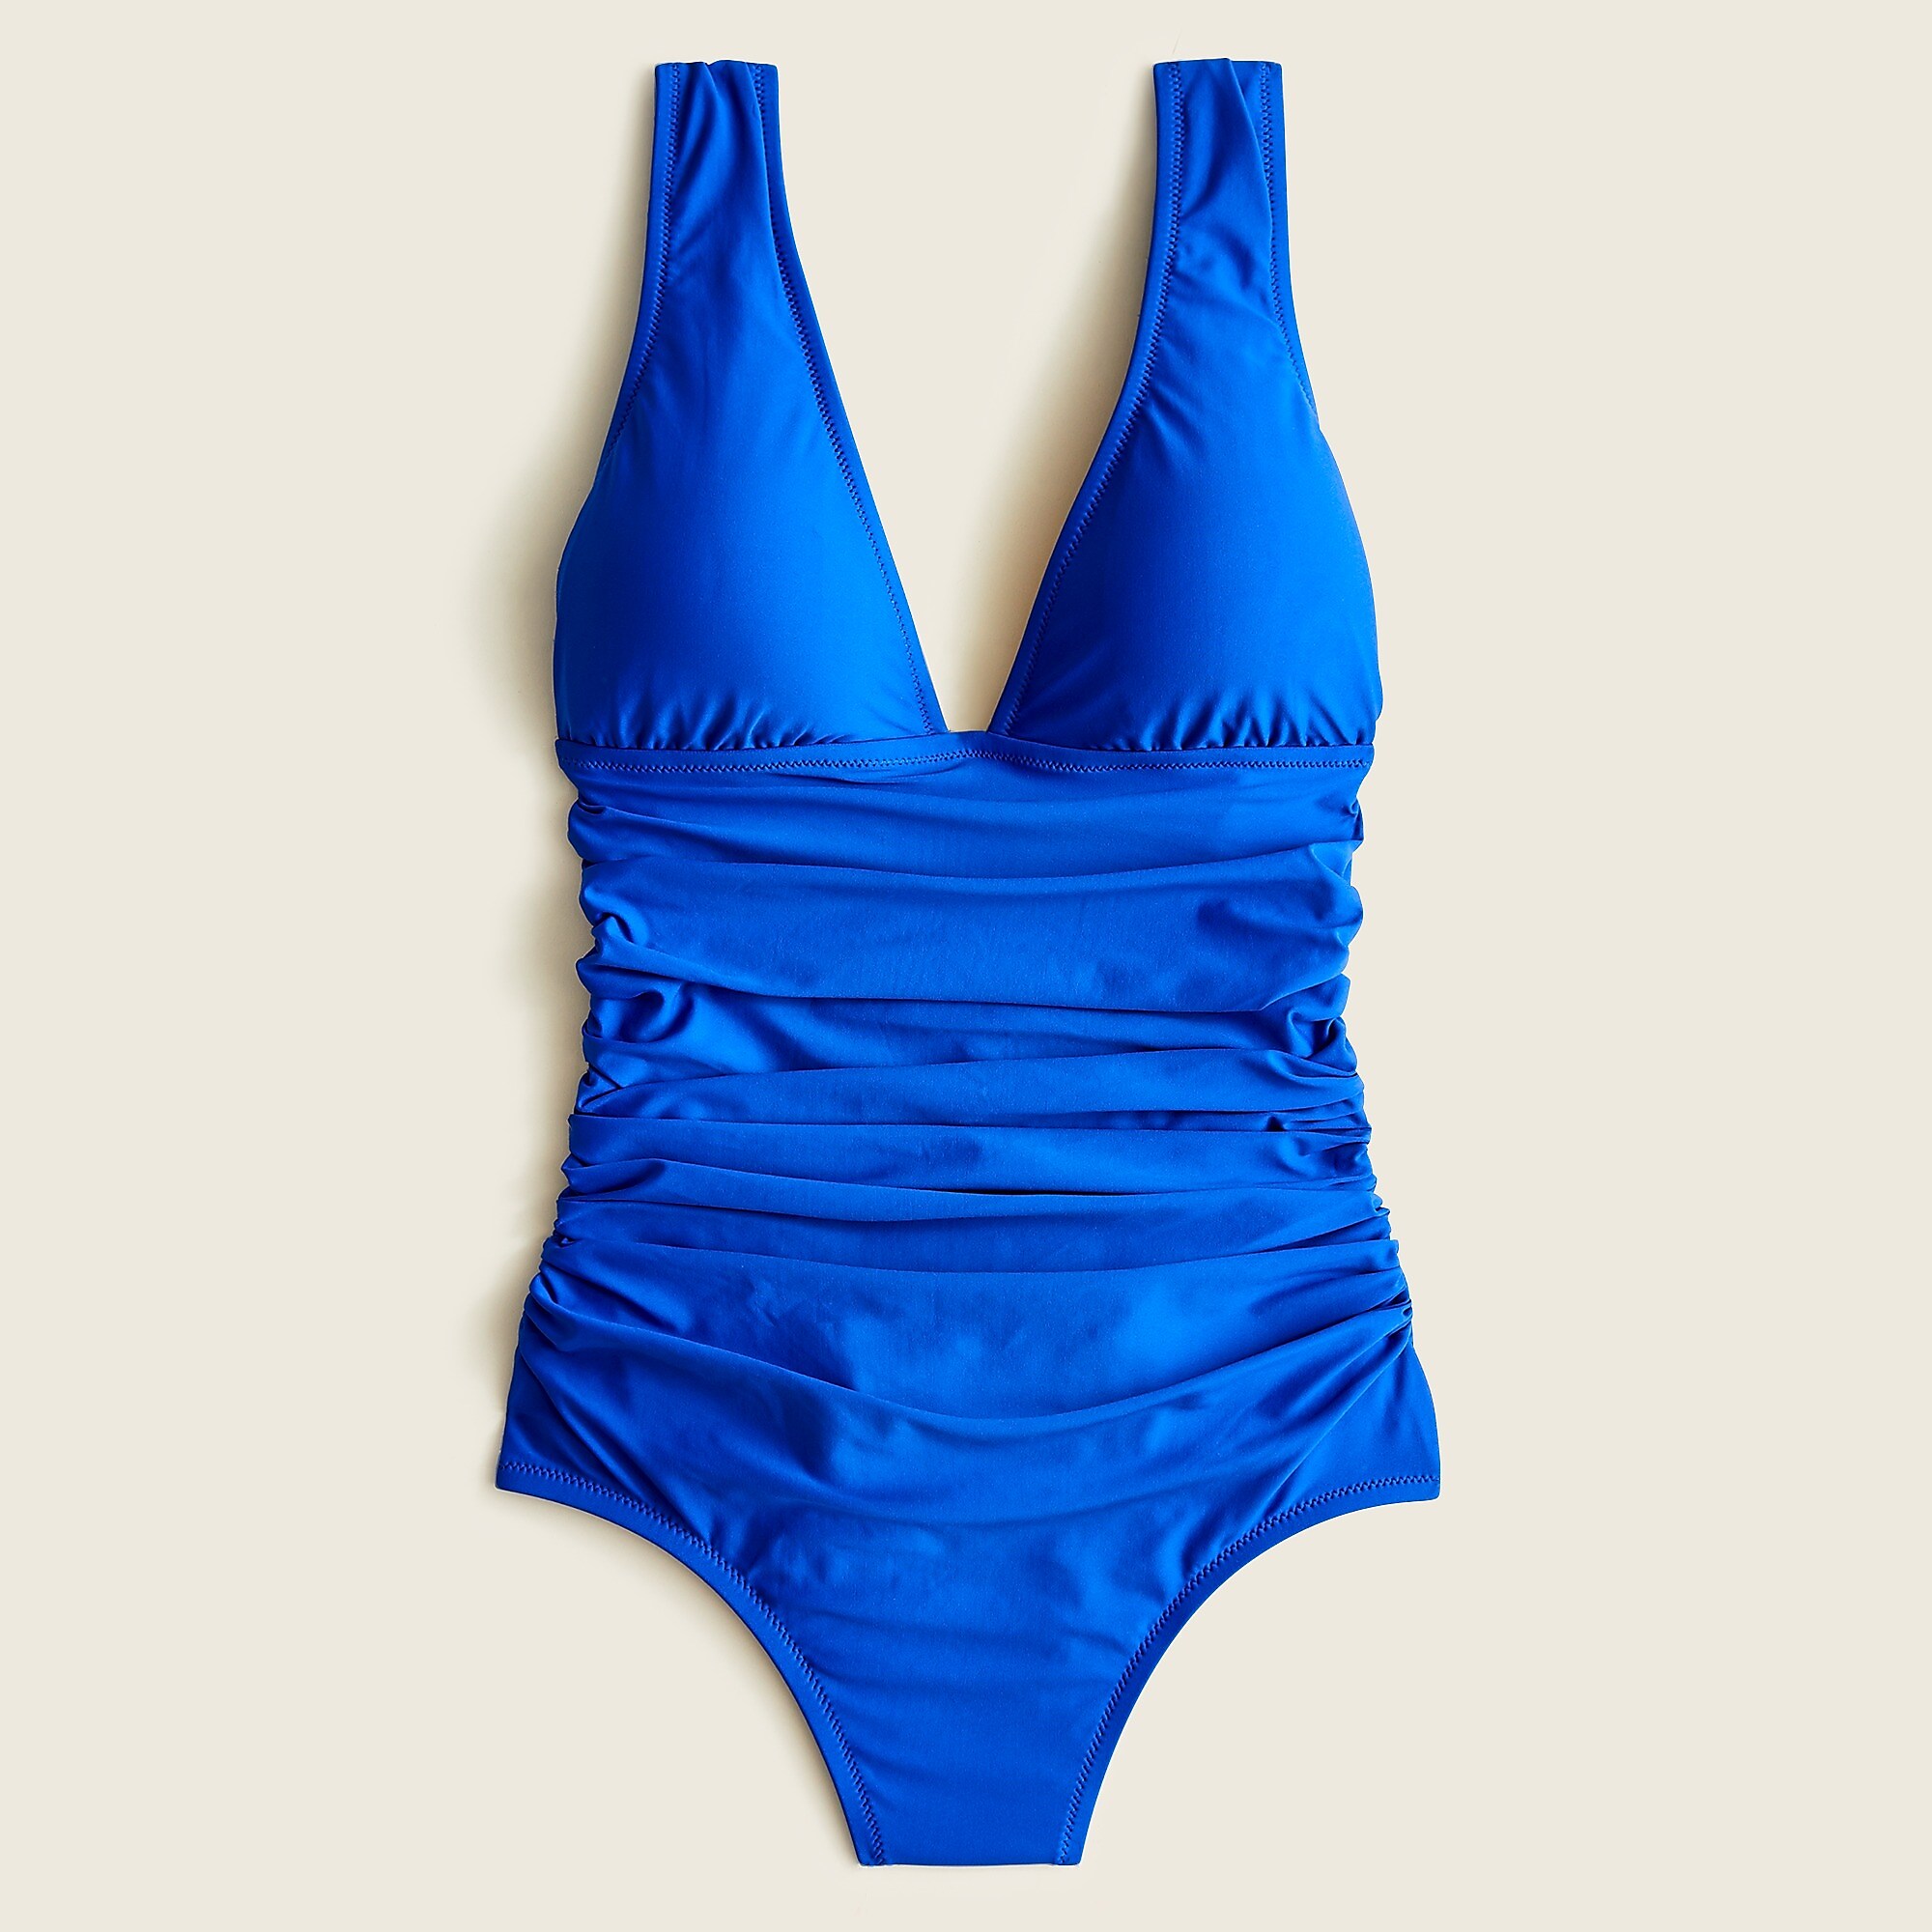 J.Crew: Ruched Femme One-piece Swimsuit